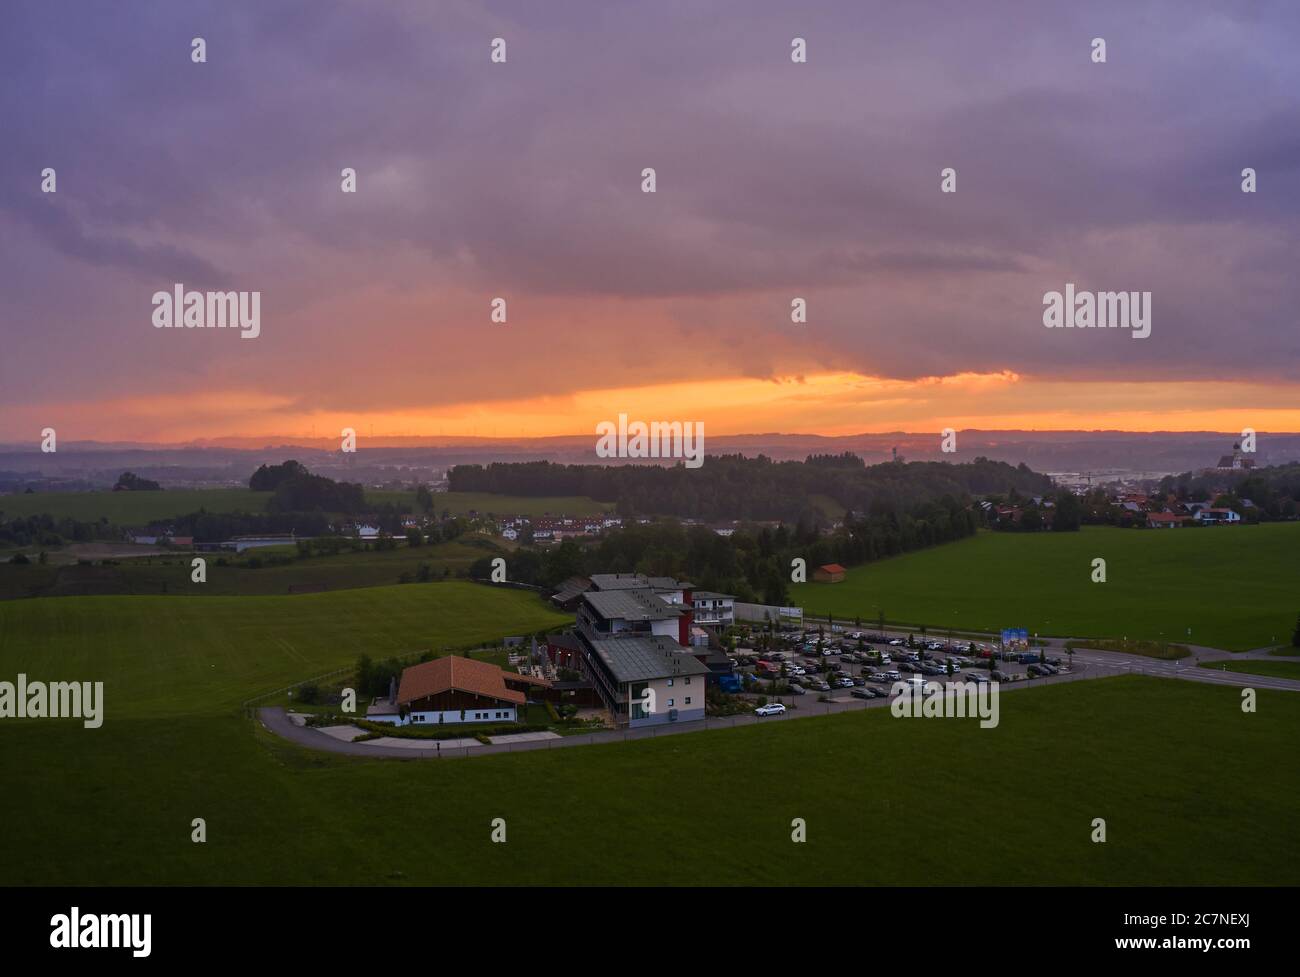 Marktoberdorf, Germany, July 12, 2020.  Panoramic landscape view after a thunder storm from  with Hotel Weitblick. © Peter Schatz / Alamy Stock Photos Stock Photo